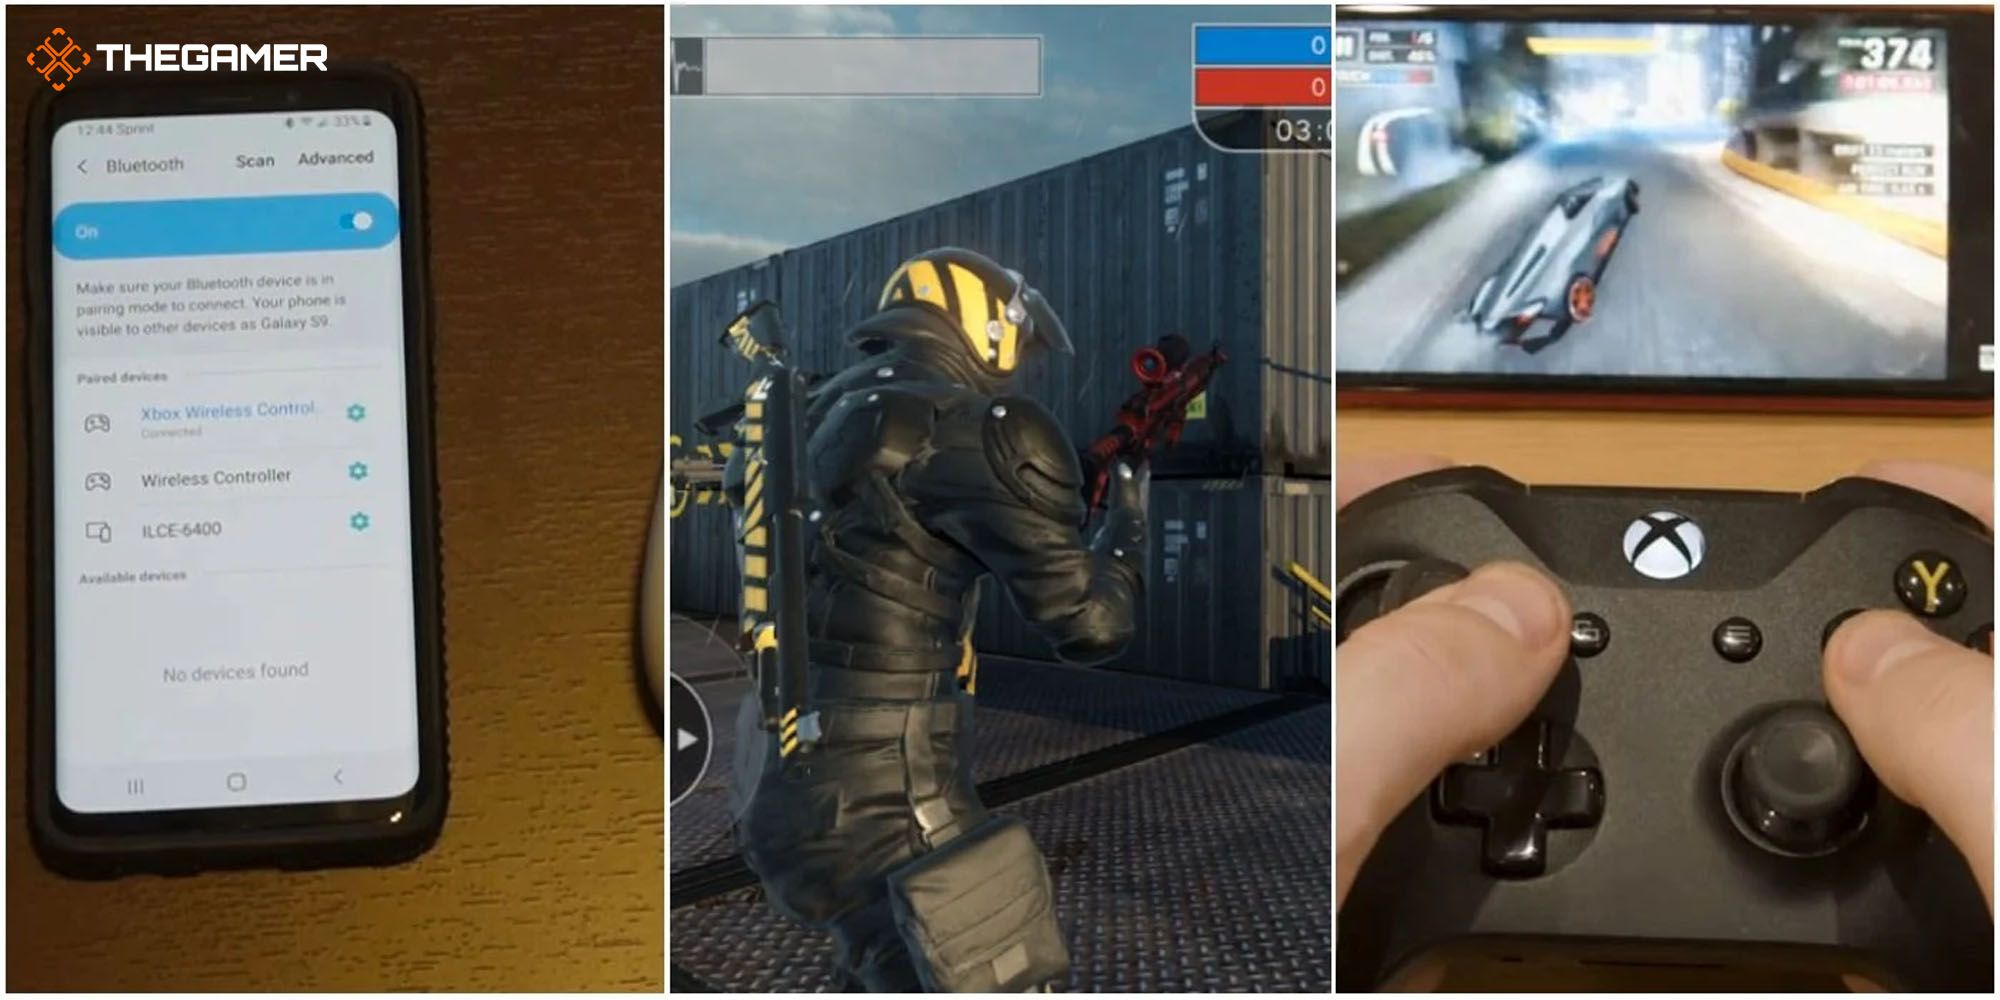 How to use a PS4 or Xbox One controller in Call of Duty: Mobile